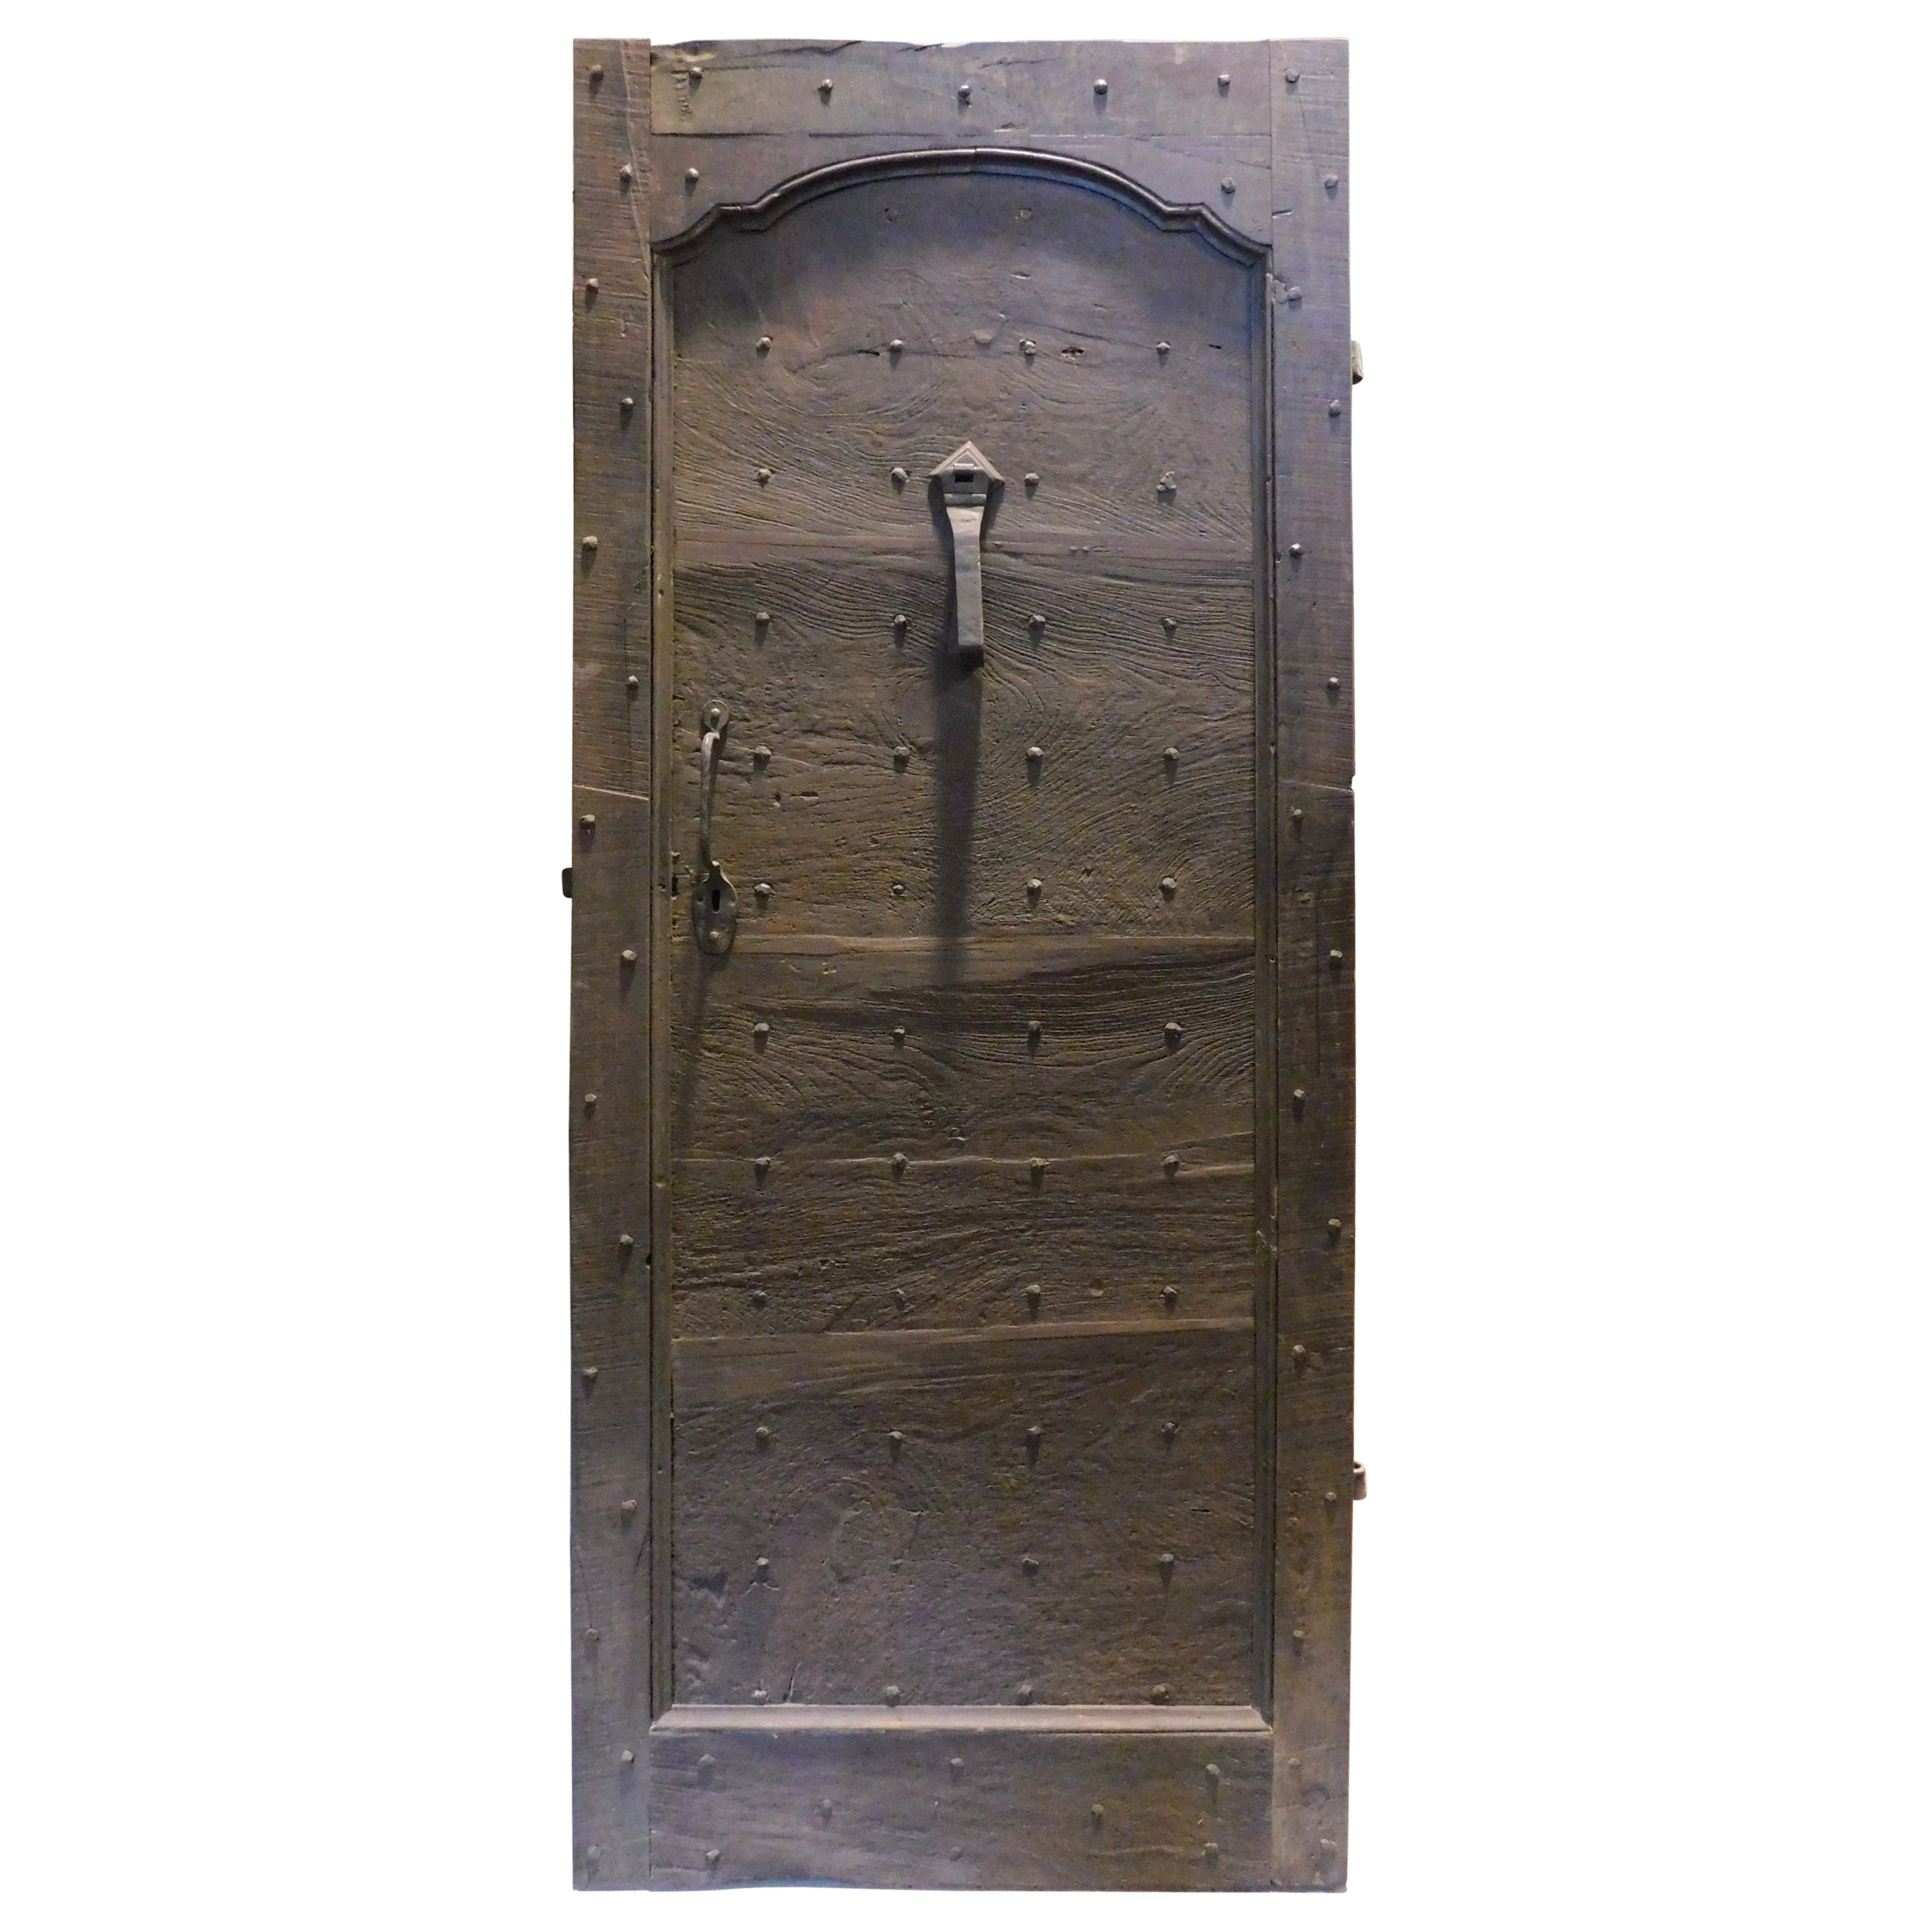 Antique walnut entrance door in rustic style, with nails, 18th century Italy